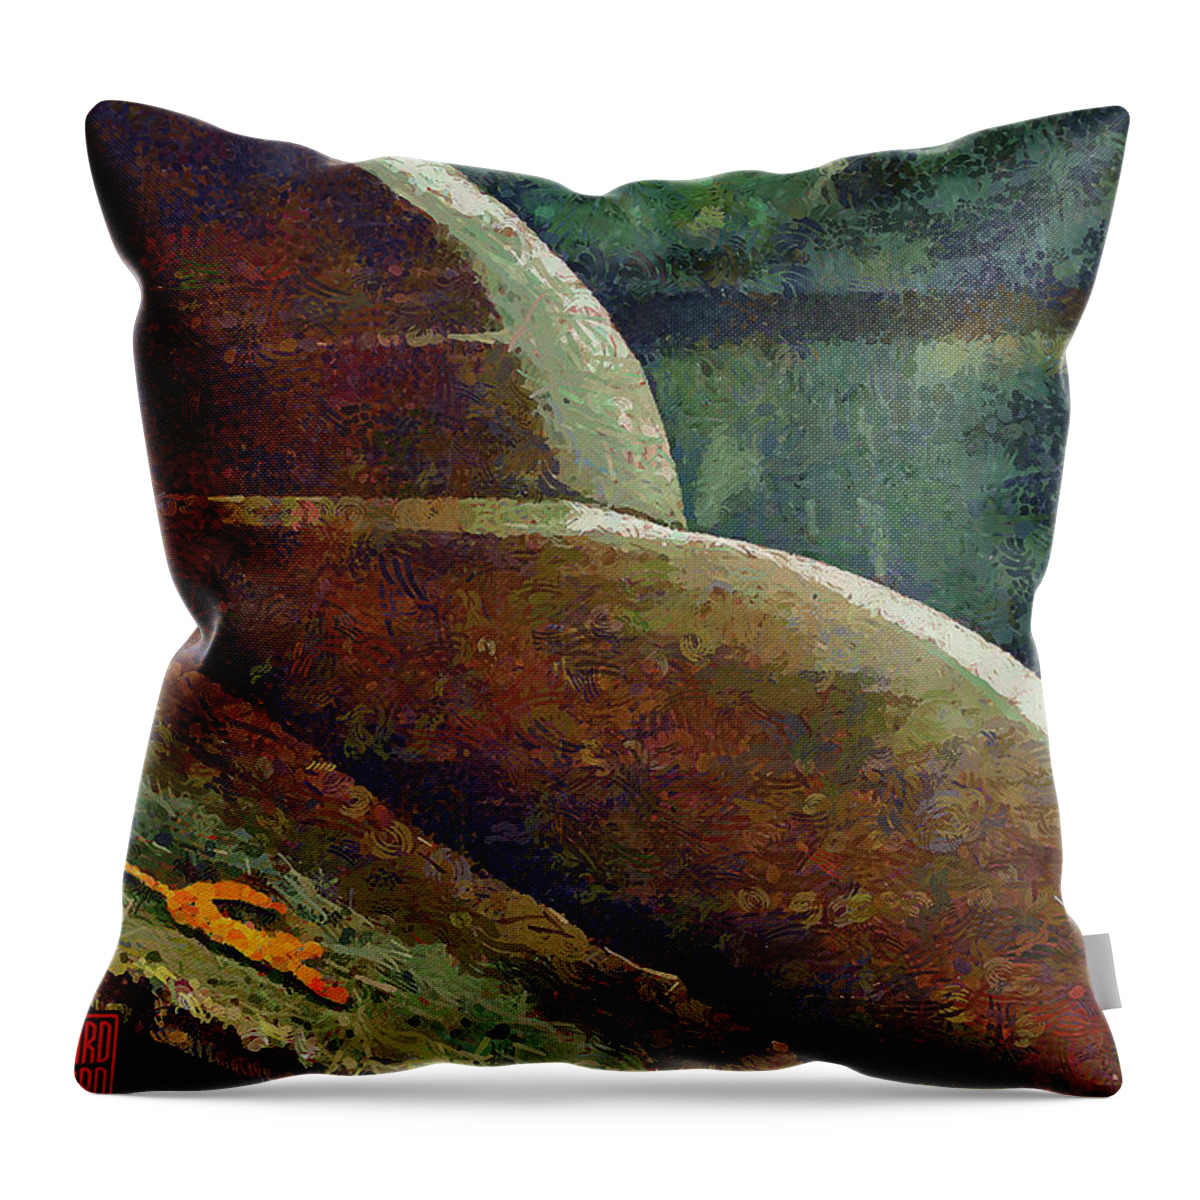 Abstract Throw Pillow featuring the mixed media 539 Orange Leaf Isshinji Temple, Osaka, Japan by Richard Neuman Architectural Gifts